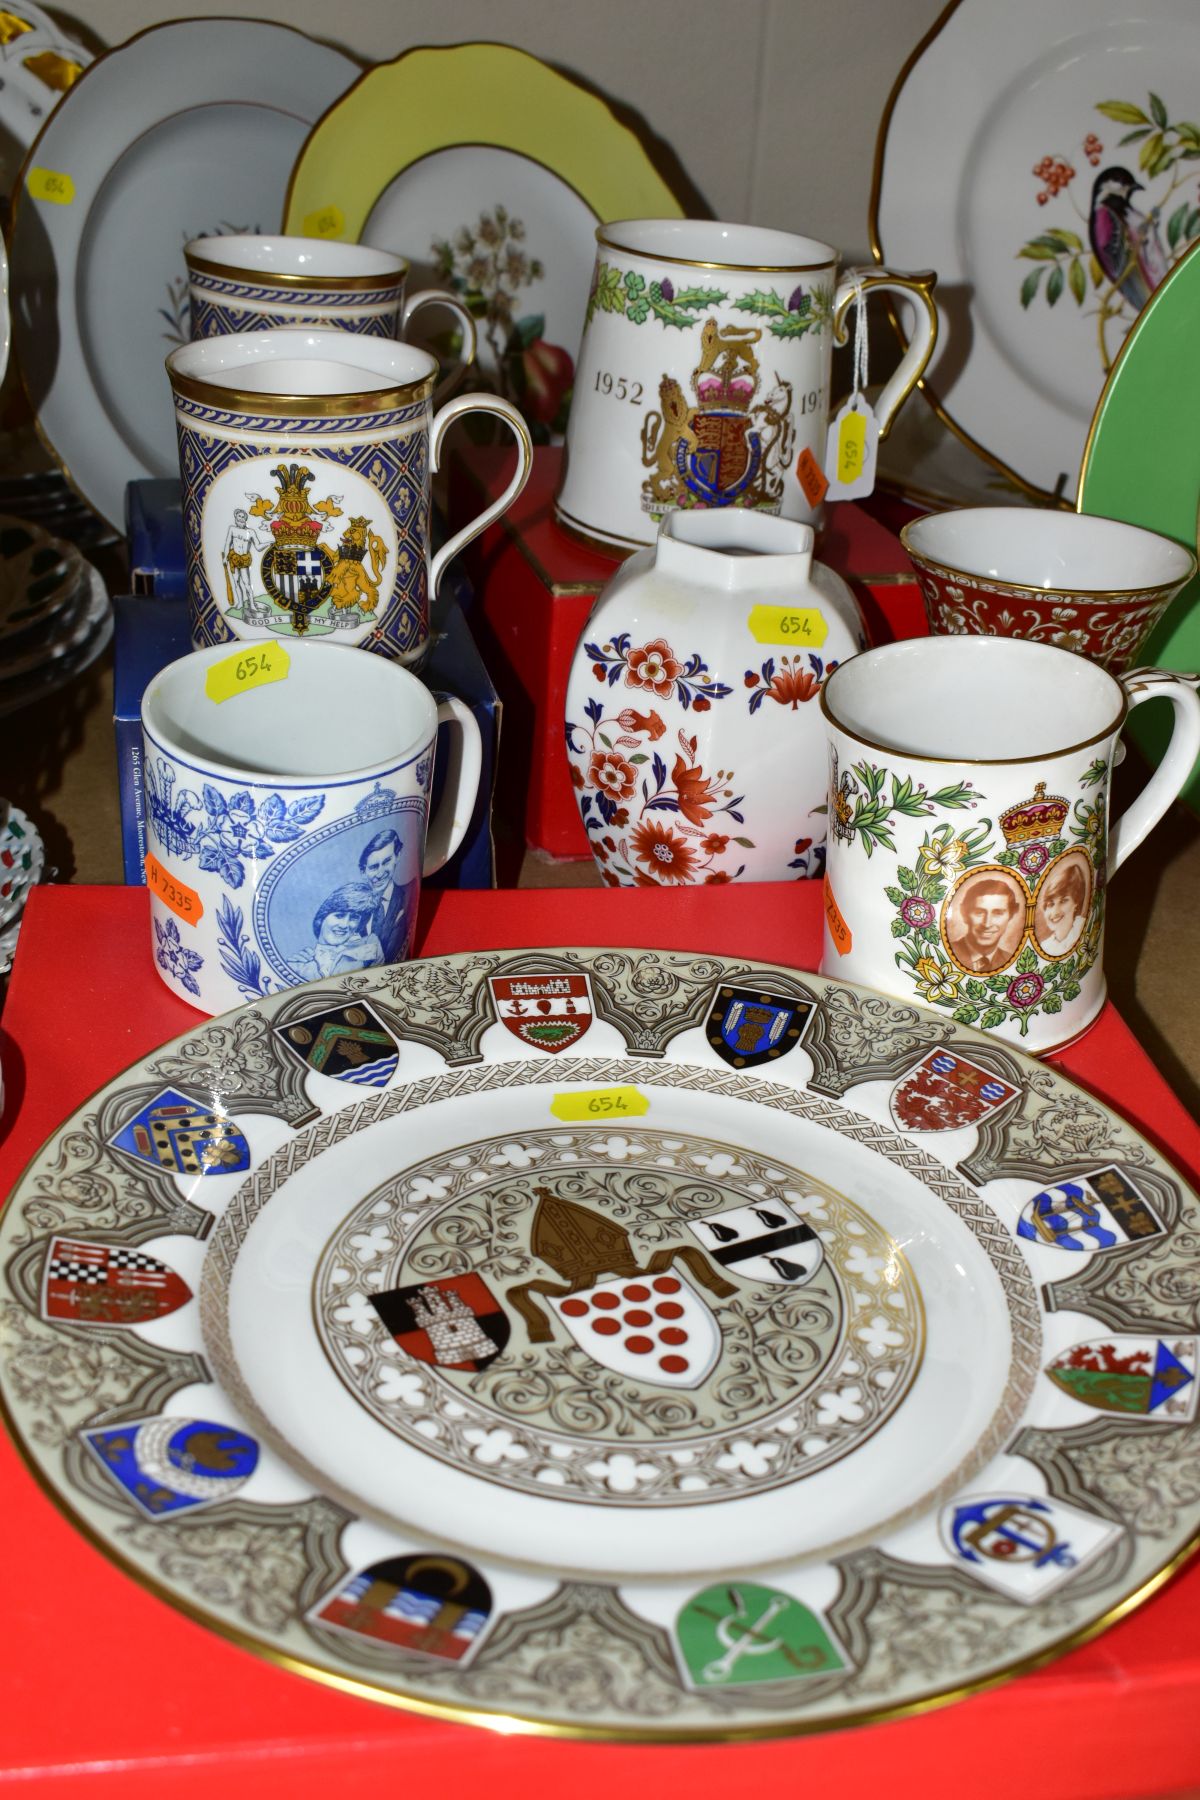 A QUANTITY OF SPODE AND COPELAND PLATES, MUGS, VASES, etc, including commemorative and Royal - Image 2 of 6